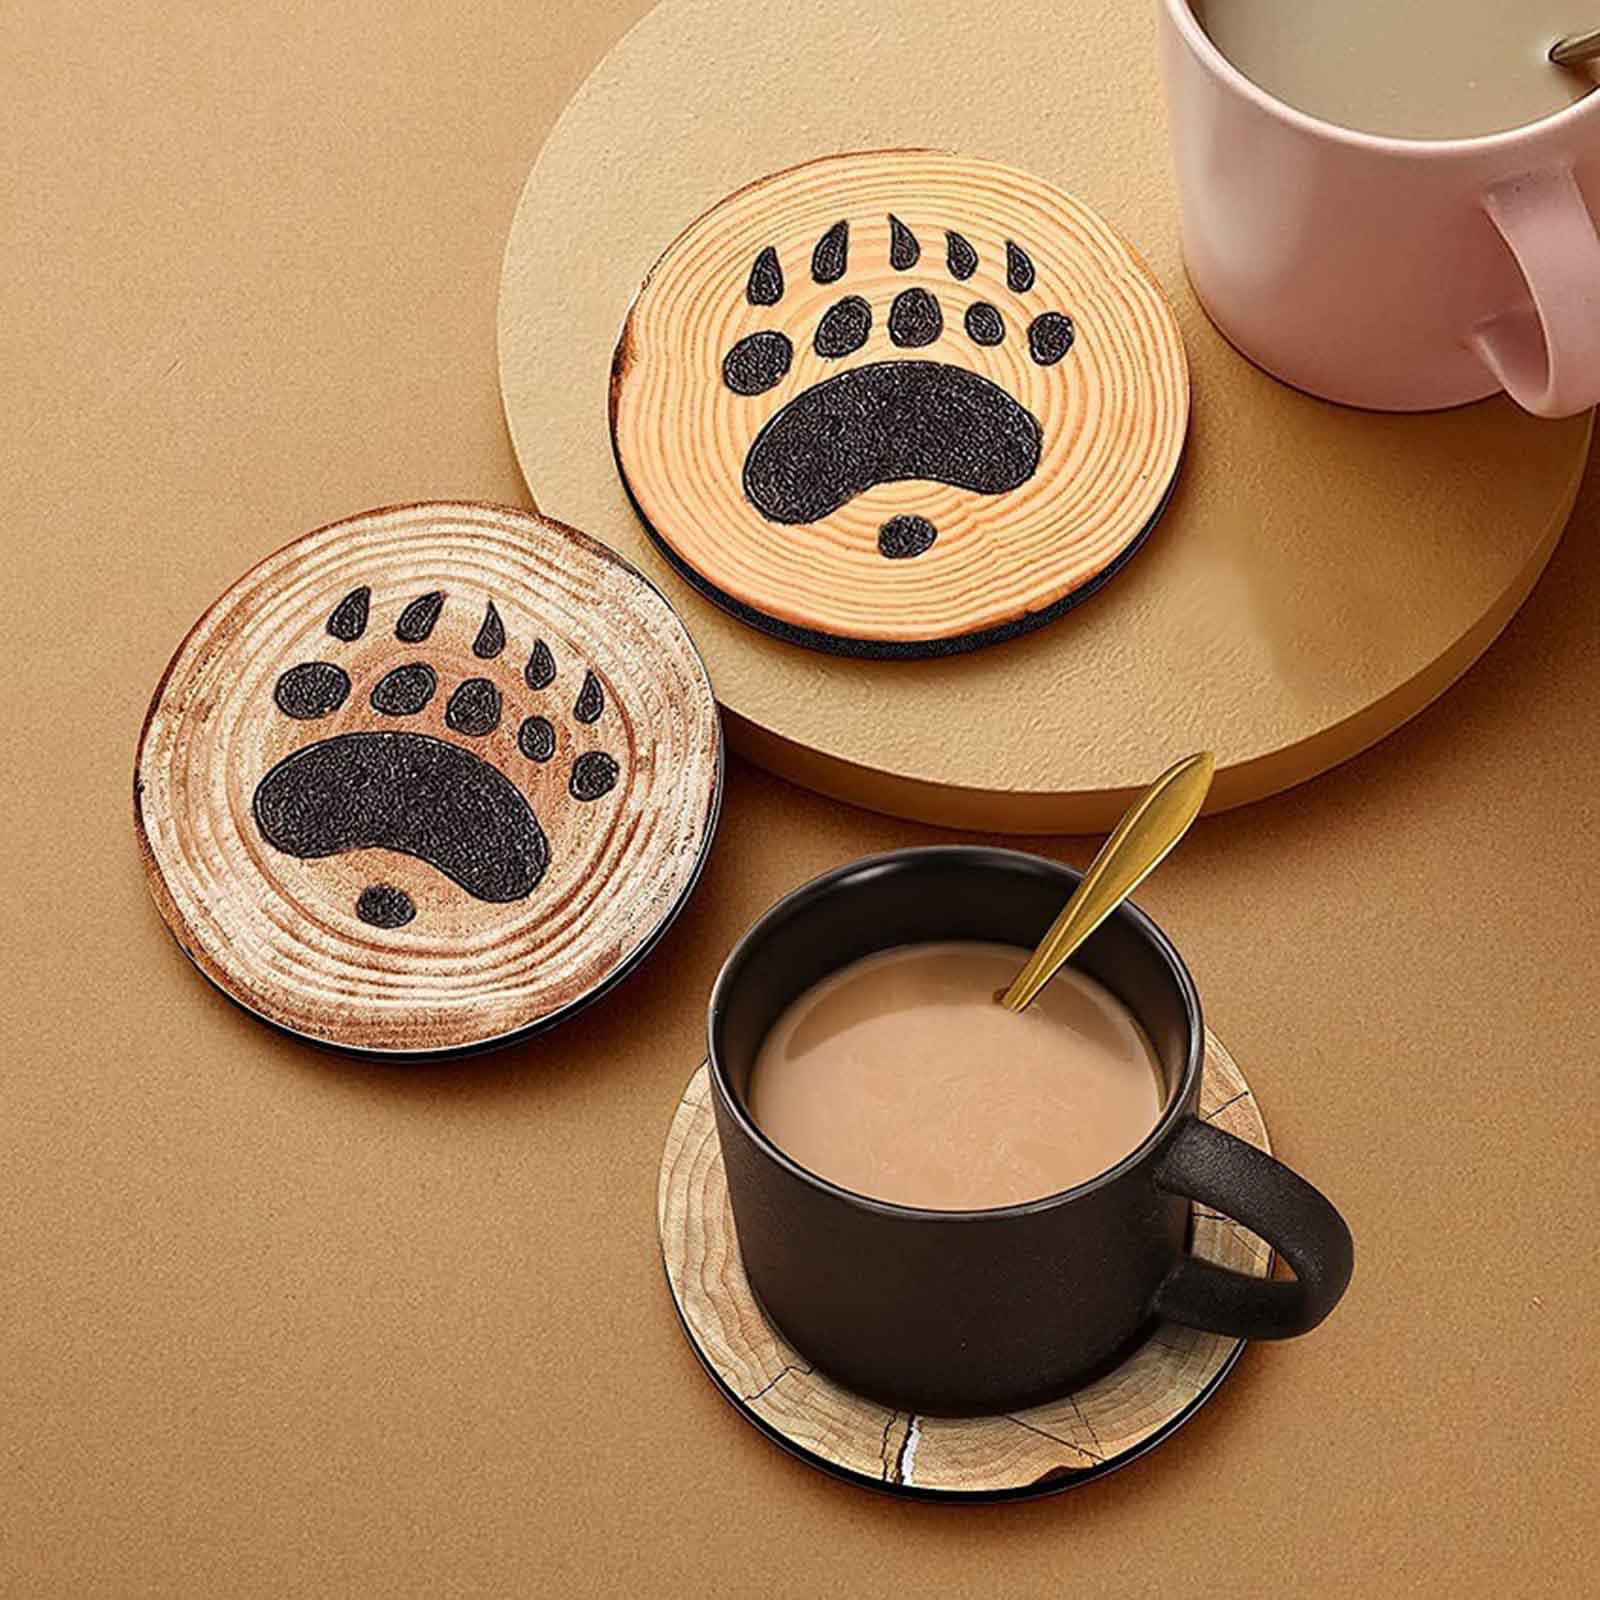 Sublimation Coaster Blanks Products,Sublimation Cup Coasters Rubber Cup Mat  For Heat Transfer Printing Crafts,Projects - AliExpress